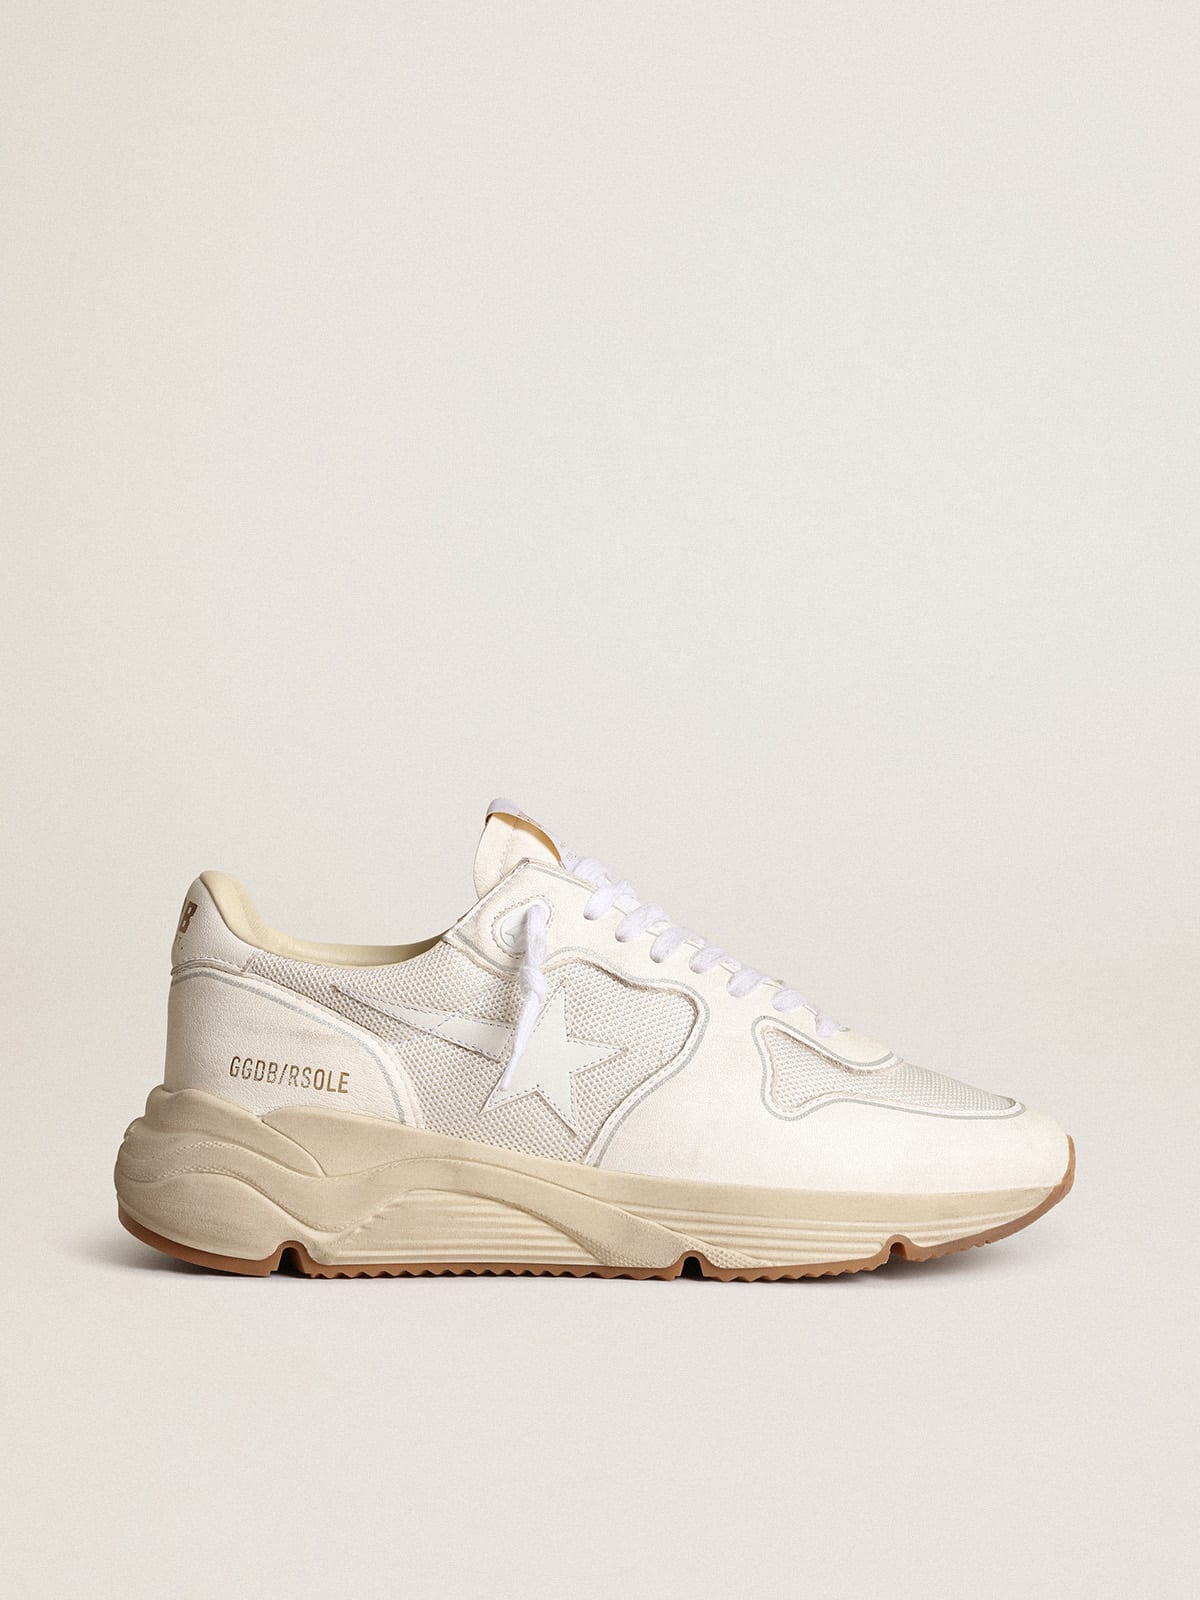 Men's Running sole sneakers in optical-white mesh and nappa leather with white leather star